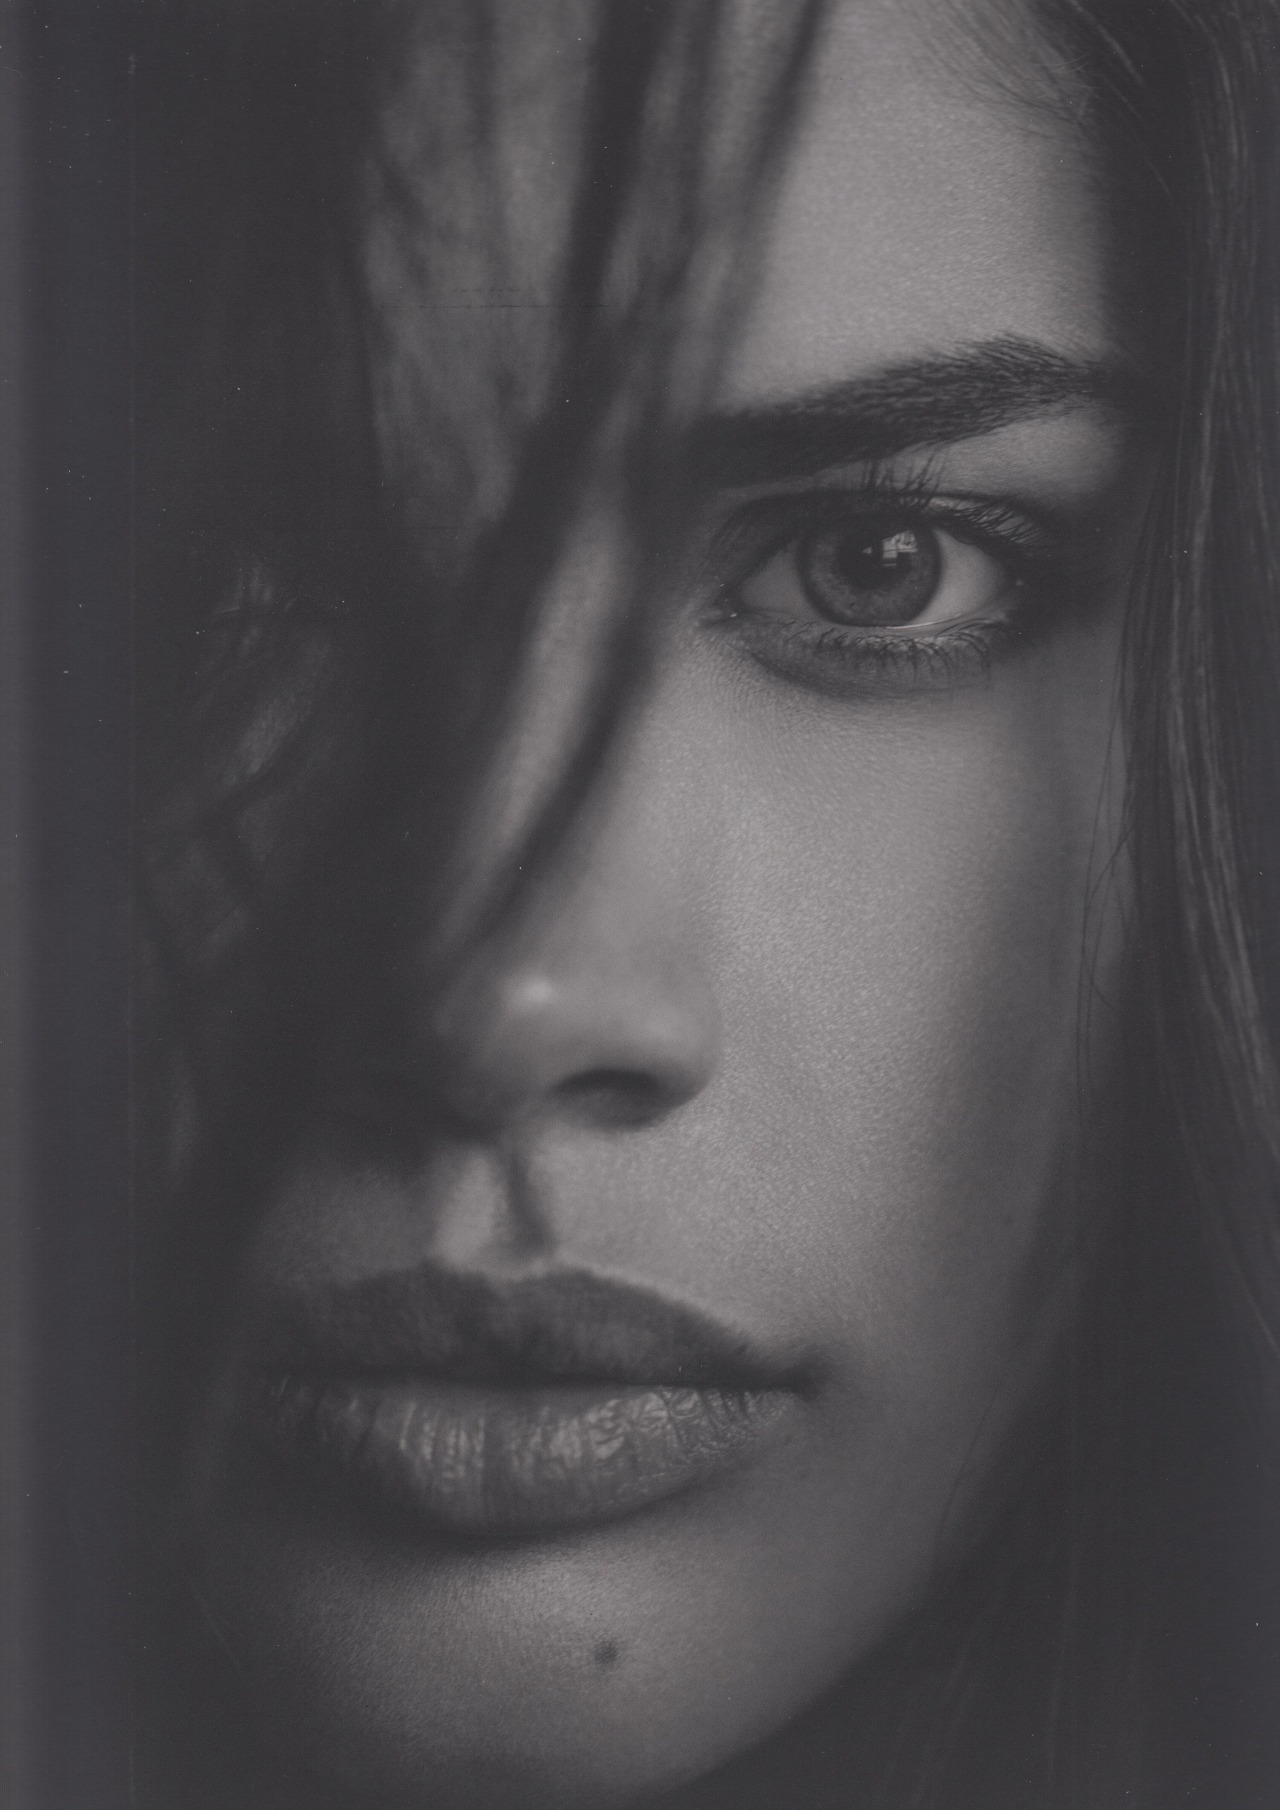 ridiculouslybeautifulwomen1:  Sara Sampaio, “Angels” by Russell James Buy the